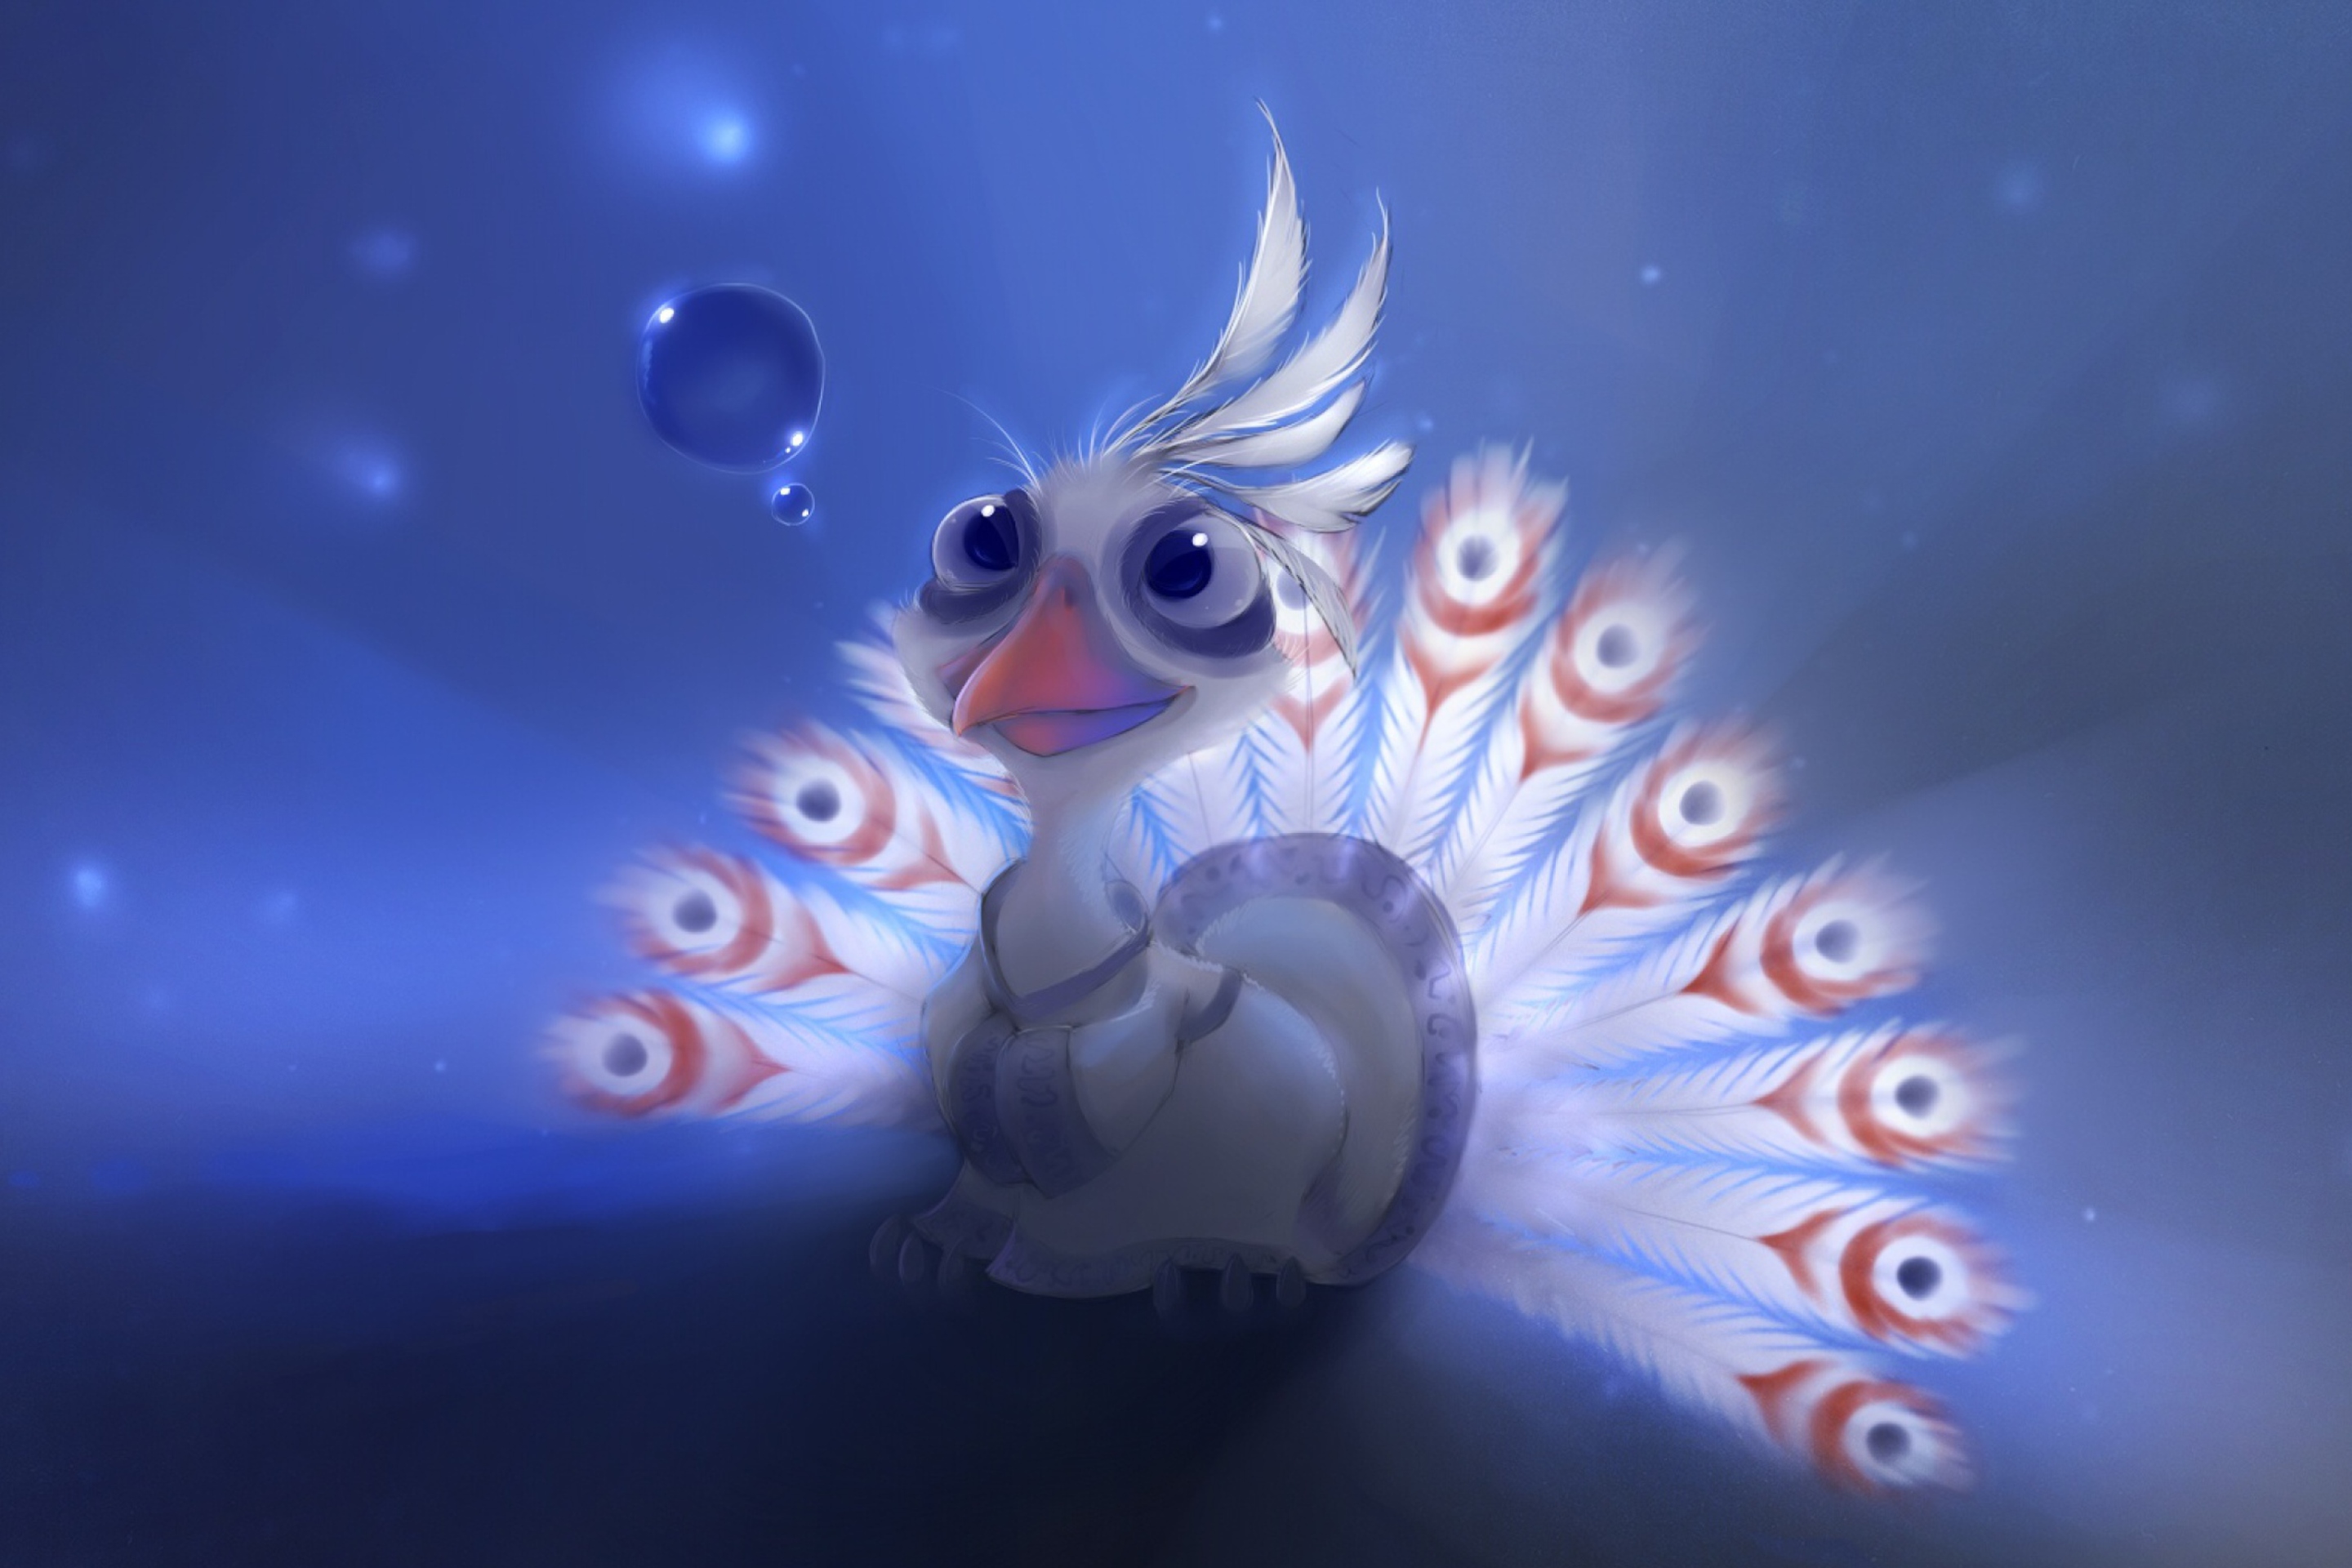 White Peacock Painting wallpaper 2880x1920